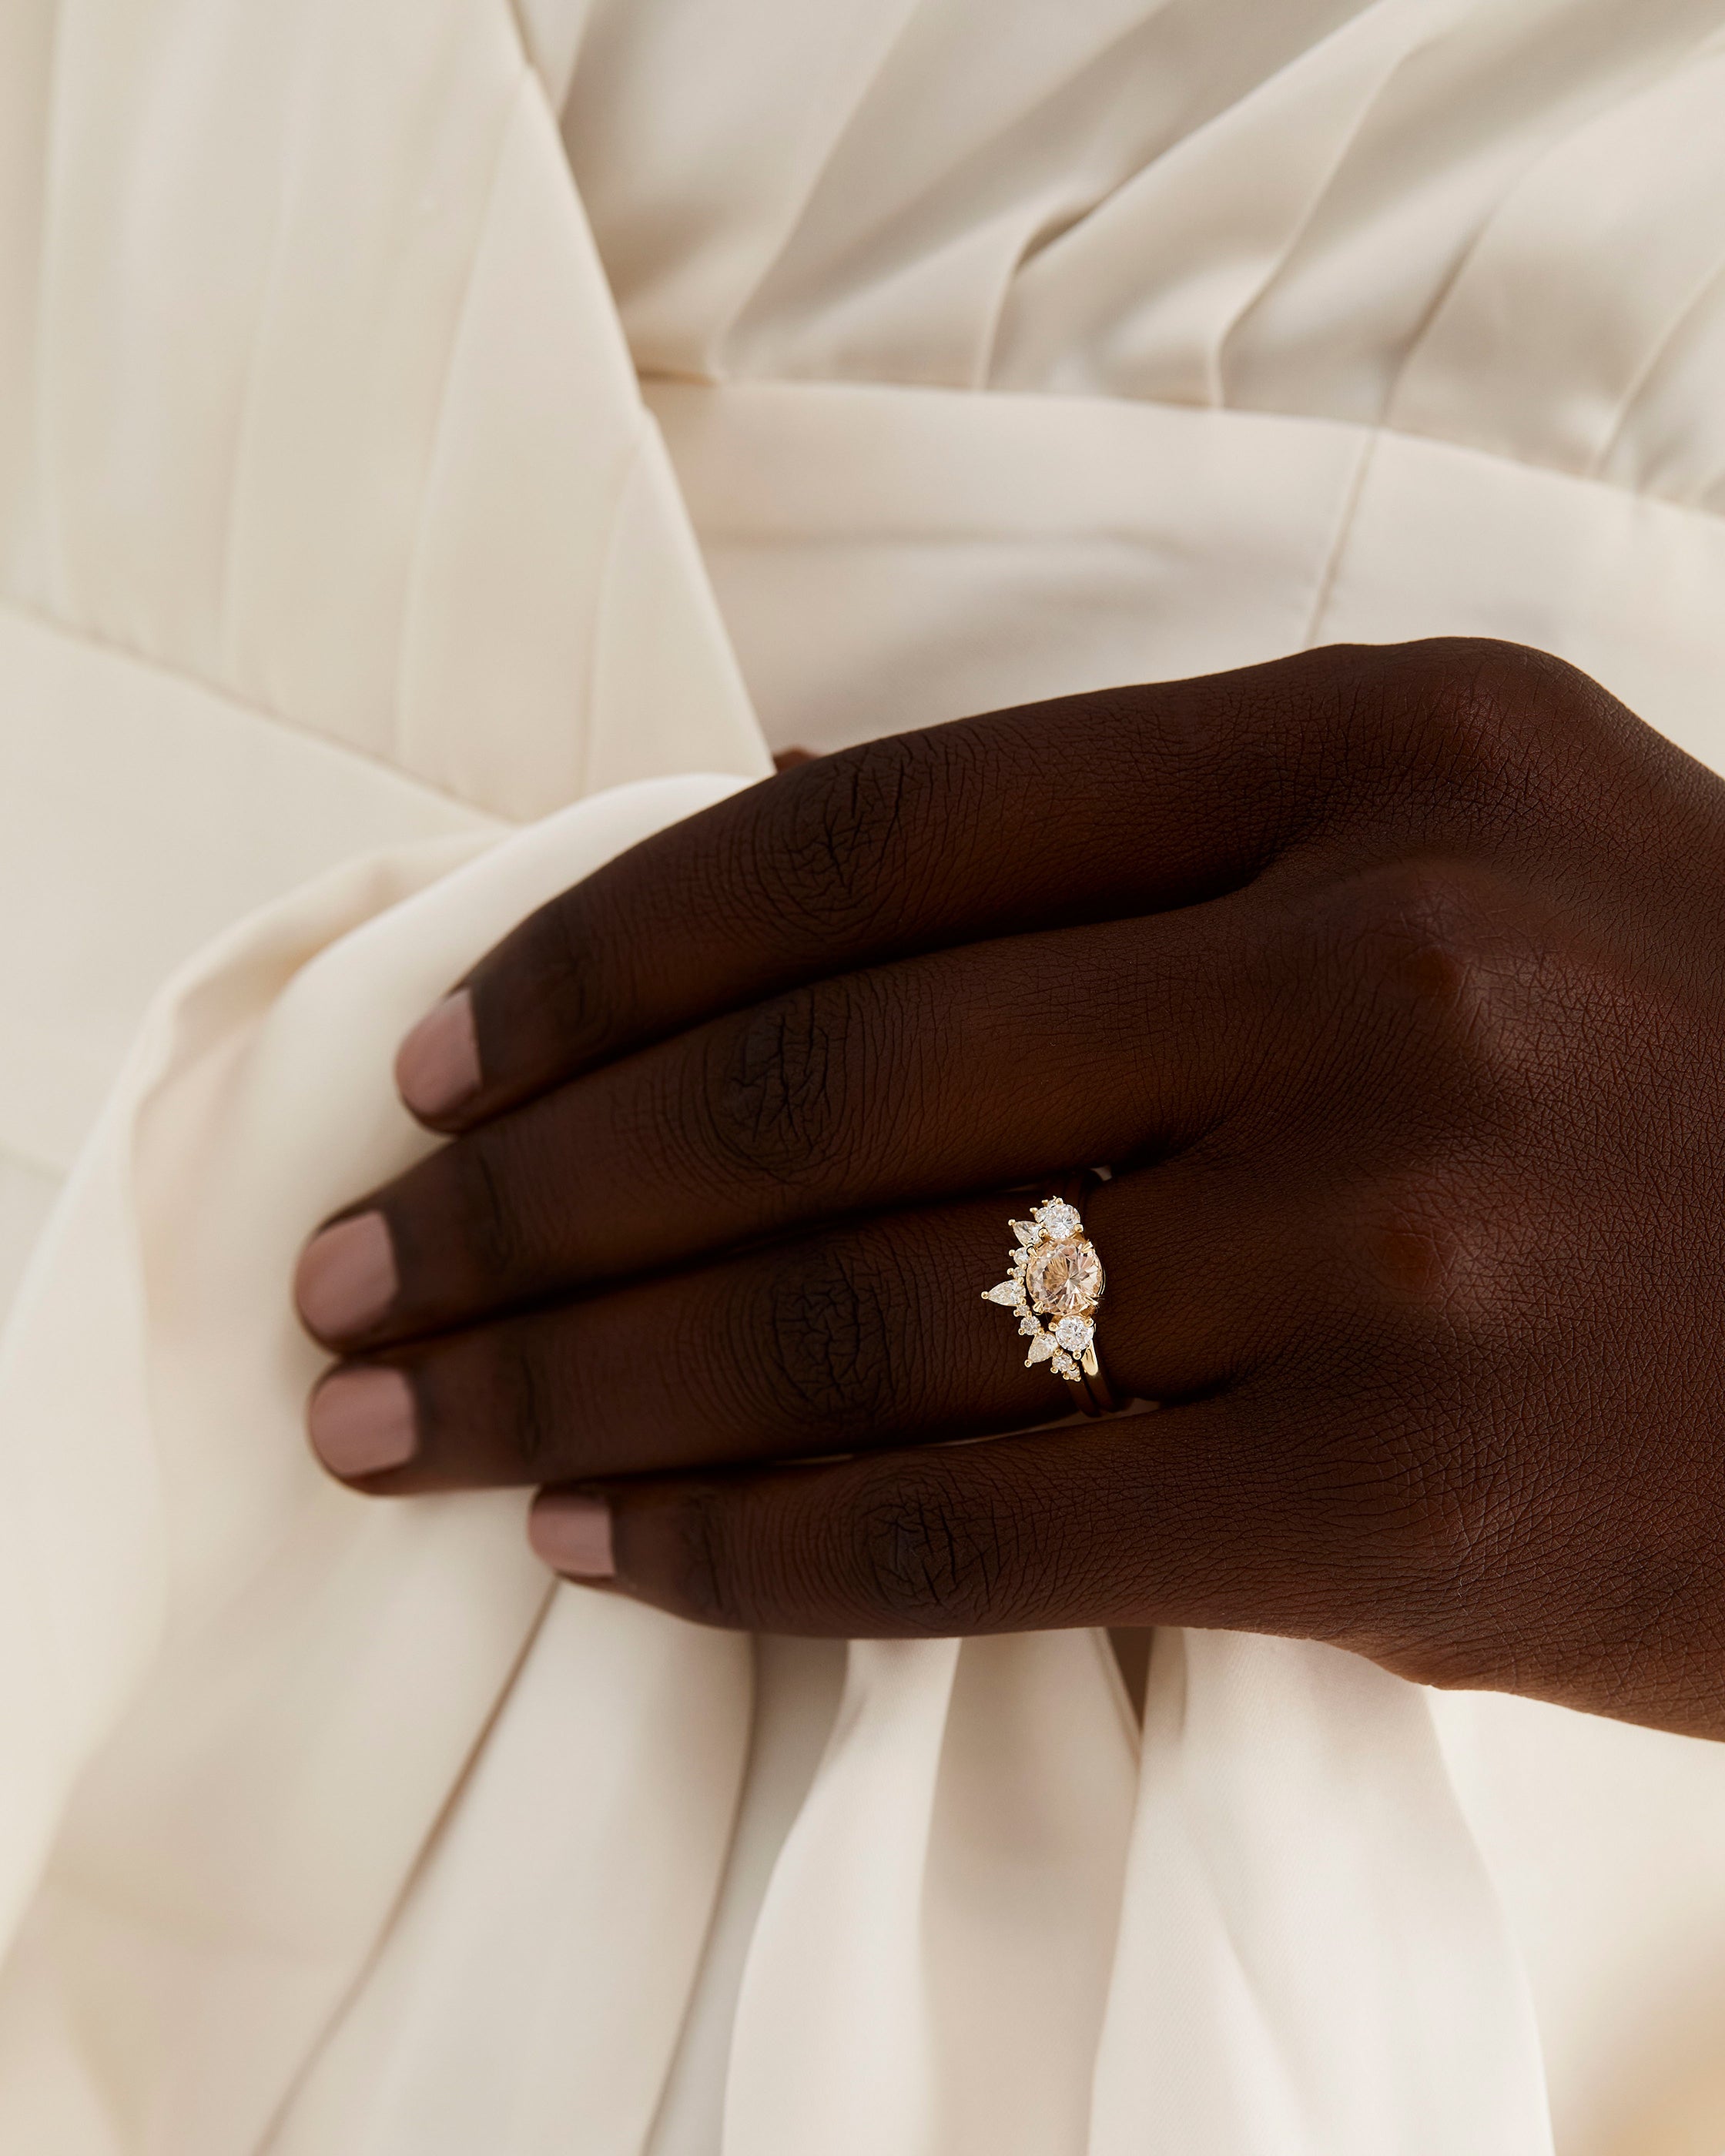 A model wears a diamond crown ring stacked with a trio style engagement ring